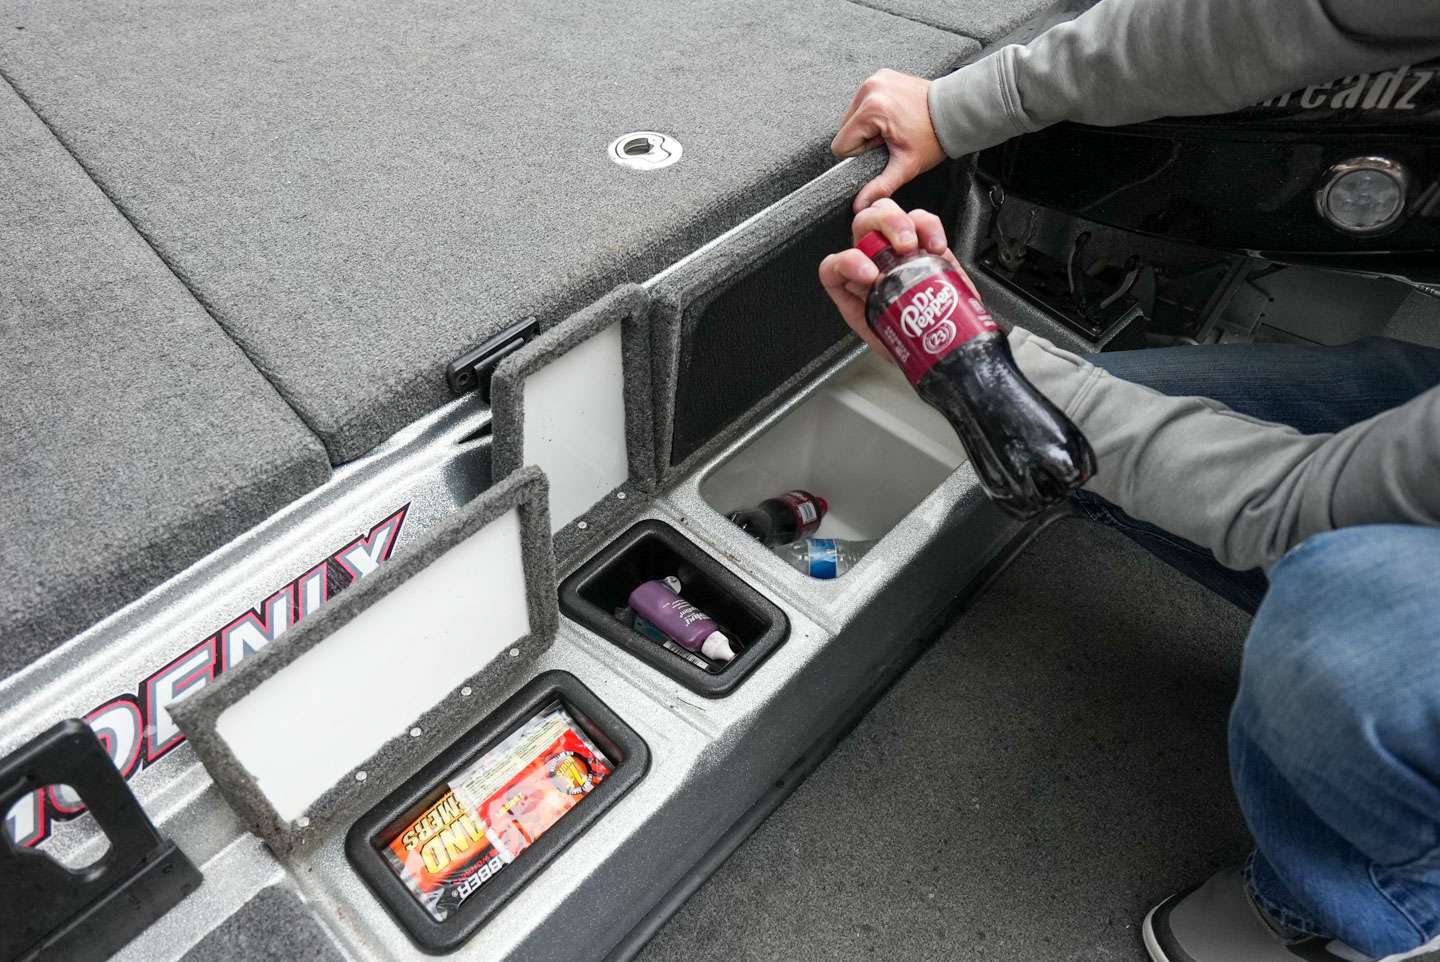 The step to the front deck actually serves as three separate compartments. Two of the compartments are home to smaller tools and miscellaneous items while the third compartment is the cooler.  